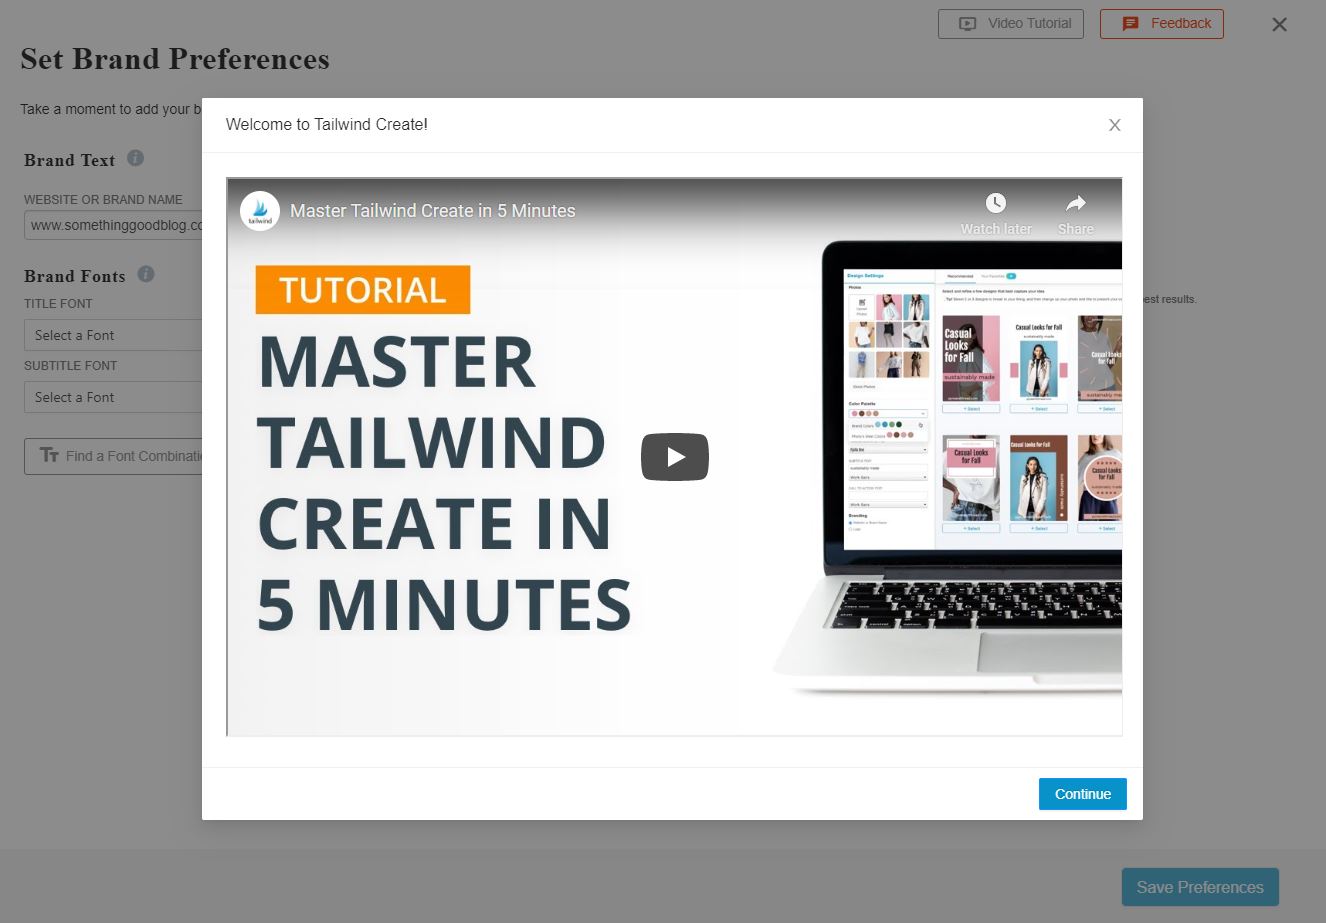 Screenshot of Tailwind tutorial video titled Master Tailwind Create in 5 Minutes